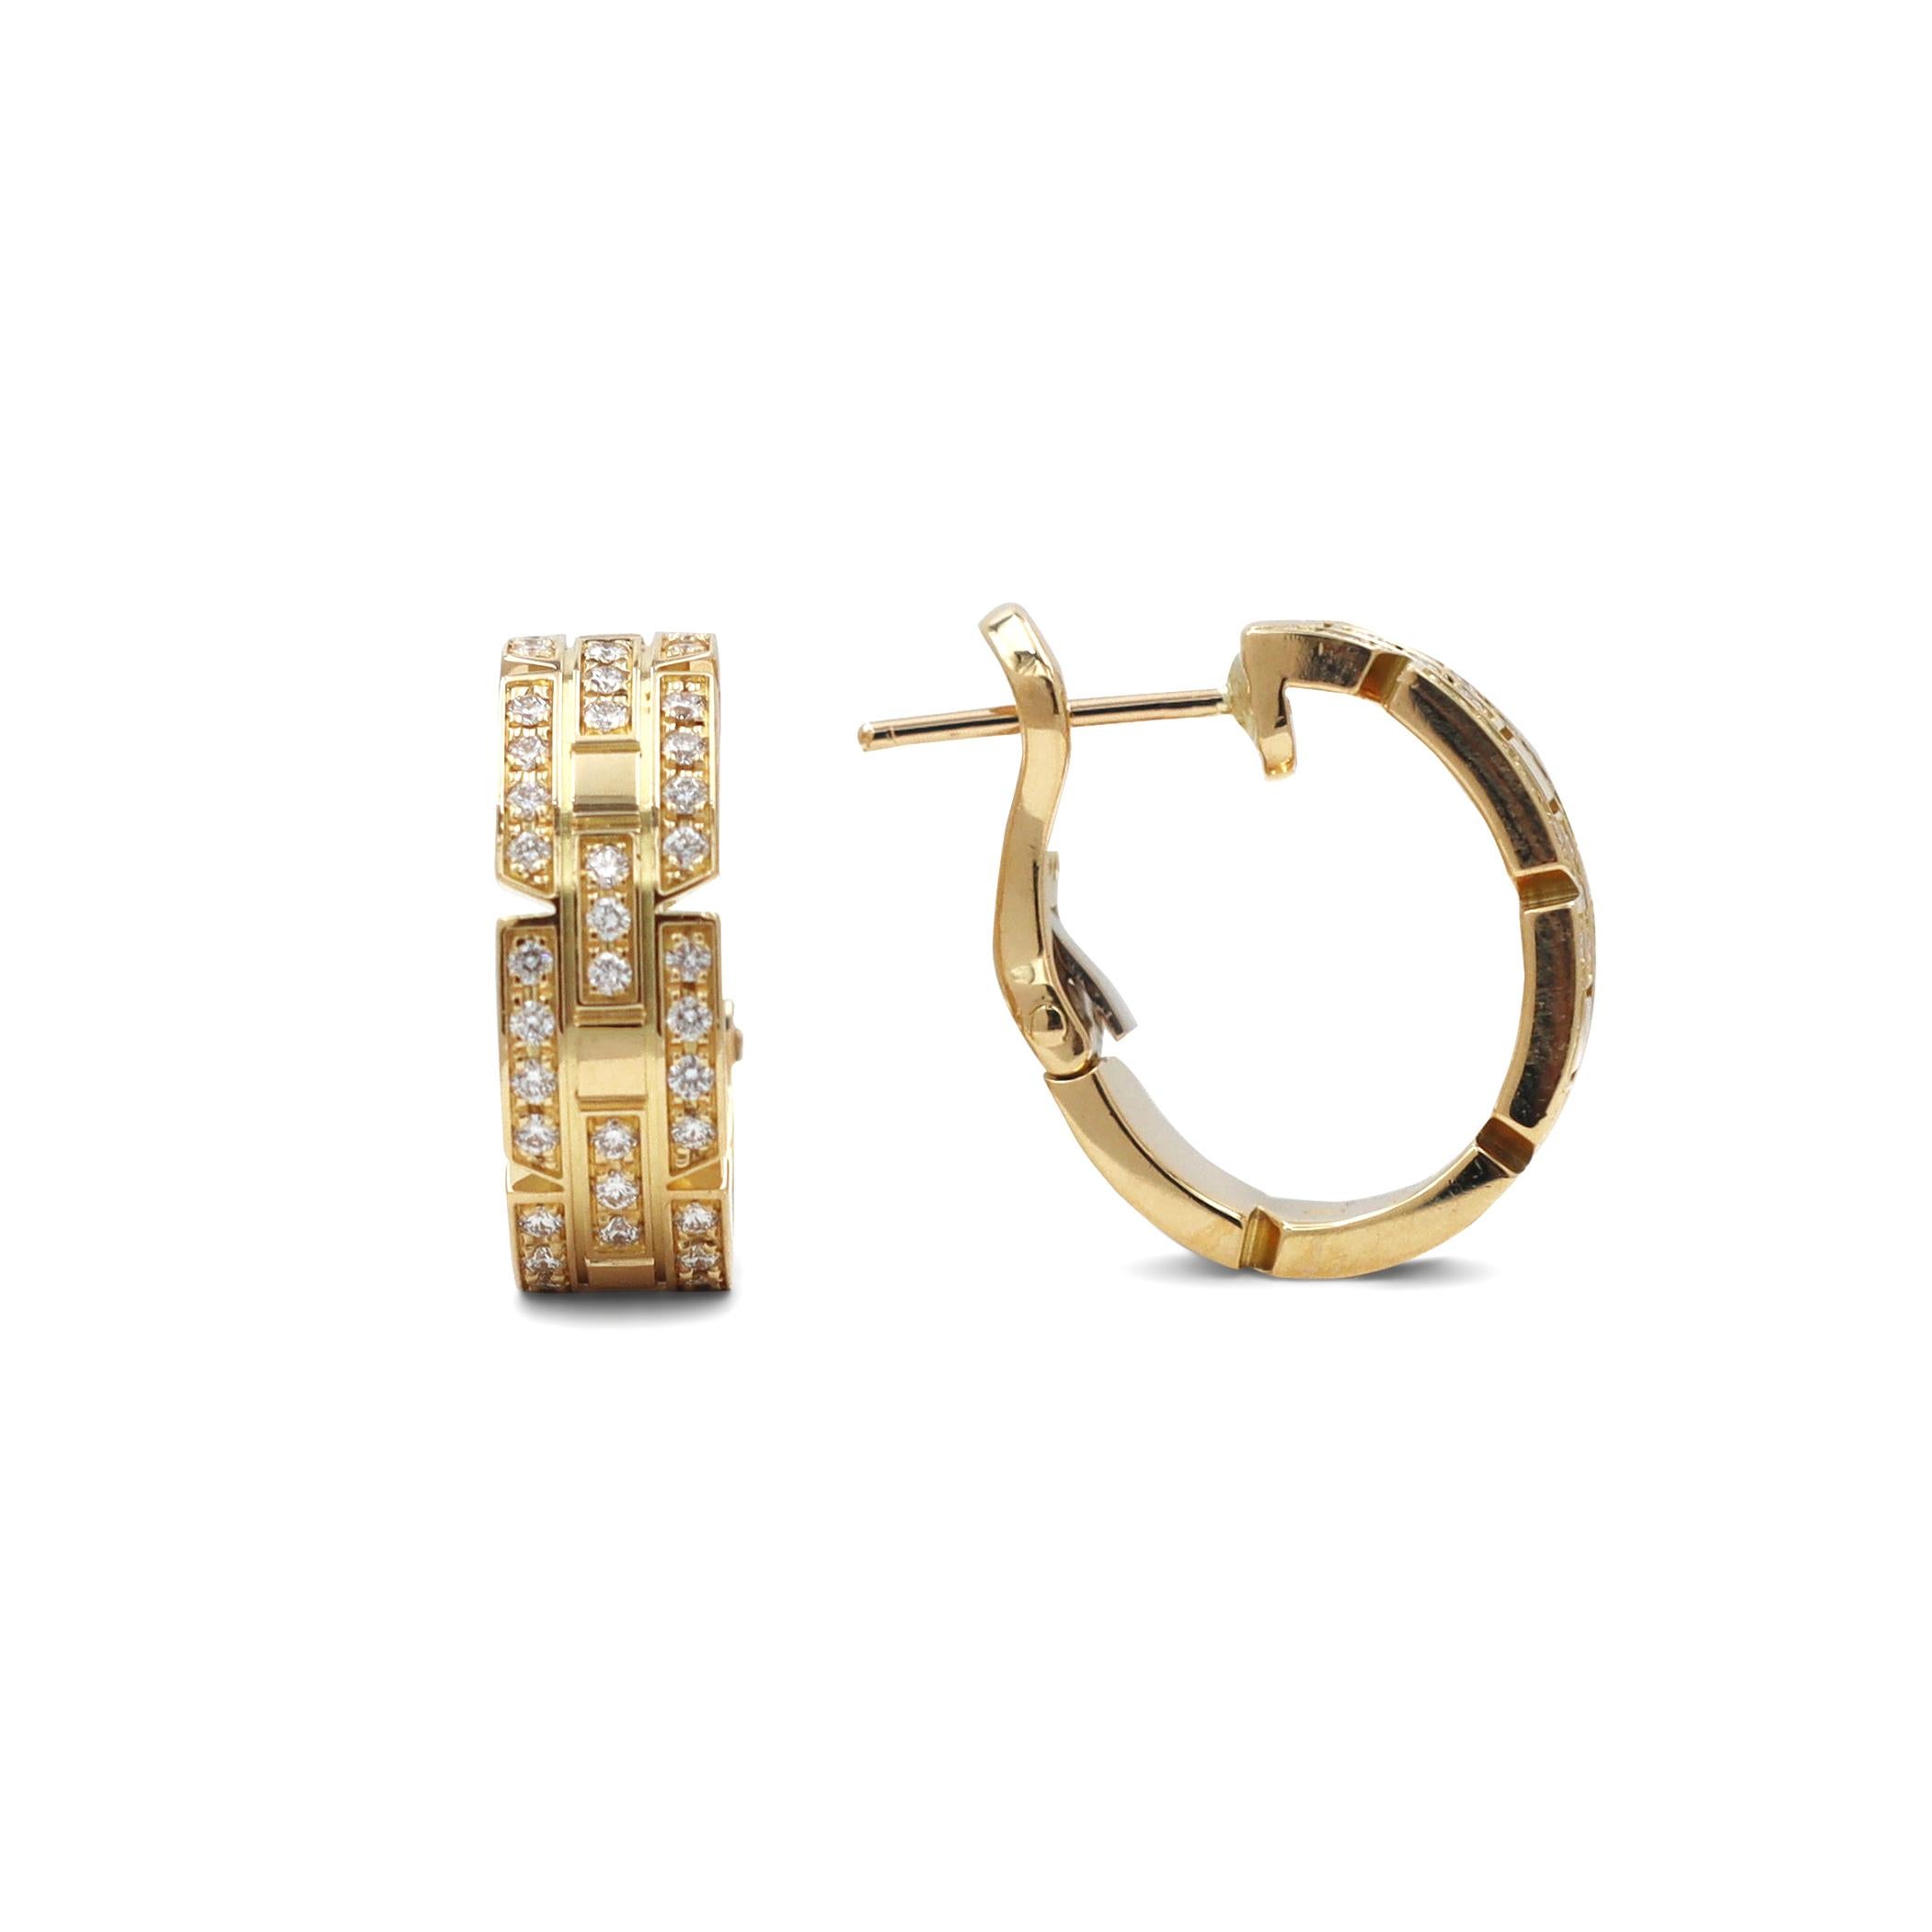 Authentic Cartier 'Tank Française' earrings crafted in 18 karat yellow are composed of three rows of iconic flat links in a half hoop design. The earrings are set with an estimated 0.78 carats of high-quality round brilliant cut diamonds (E-F, VS).